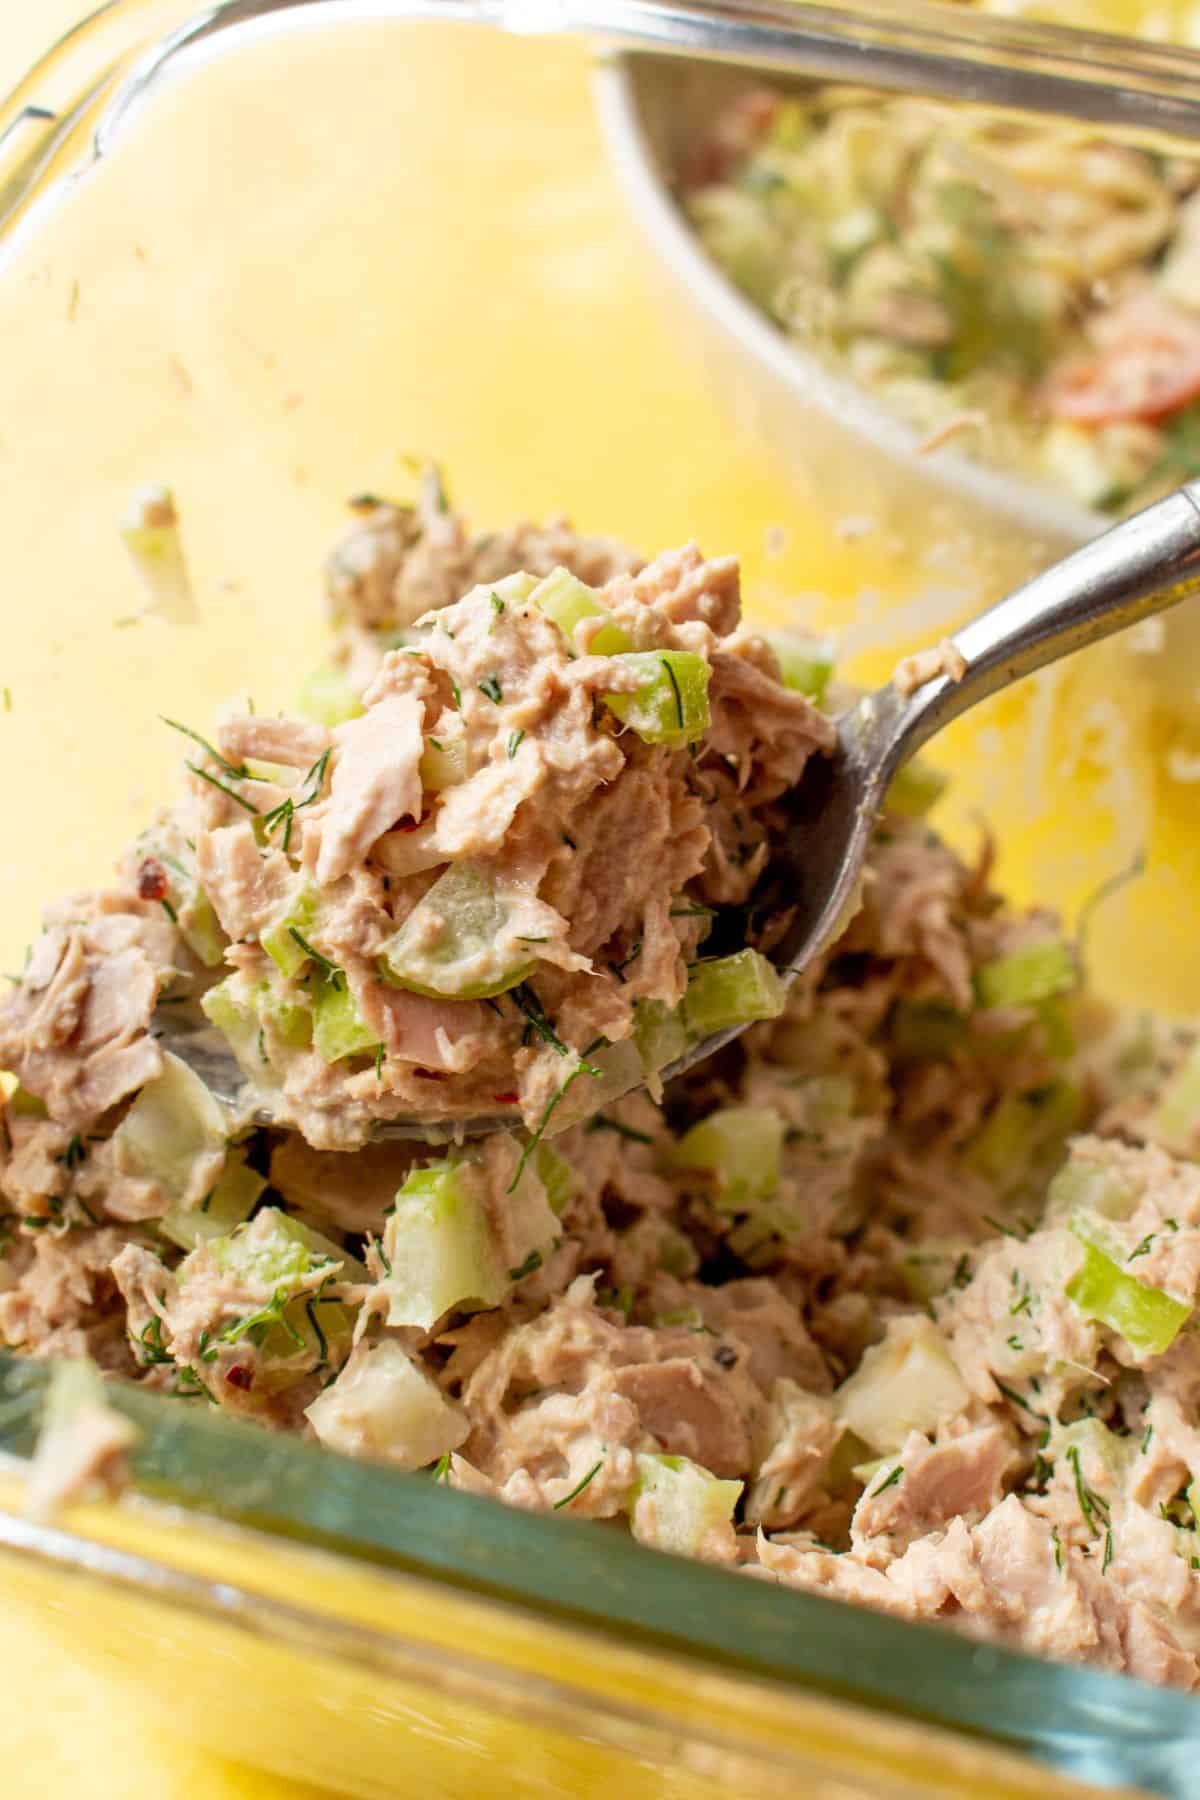 Tuna mixed with celery in glass bowl